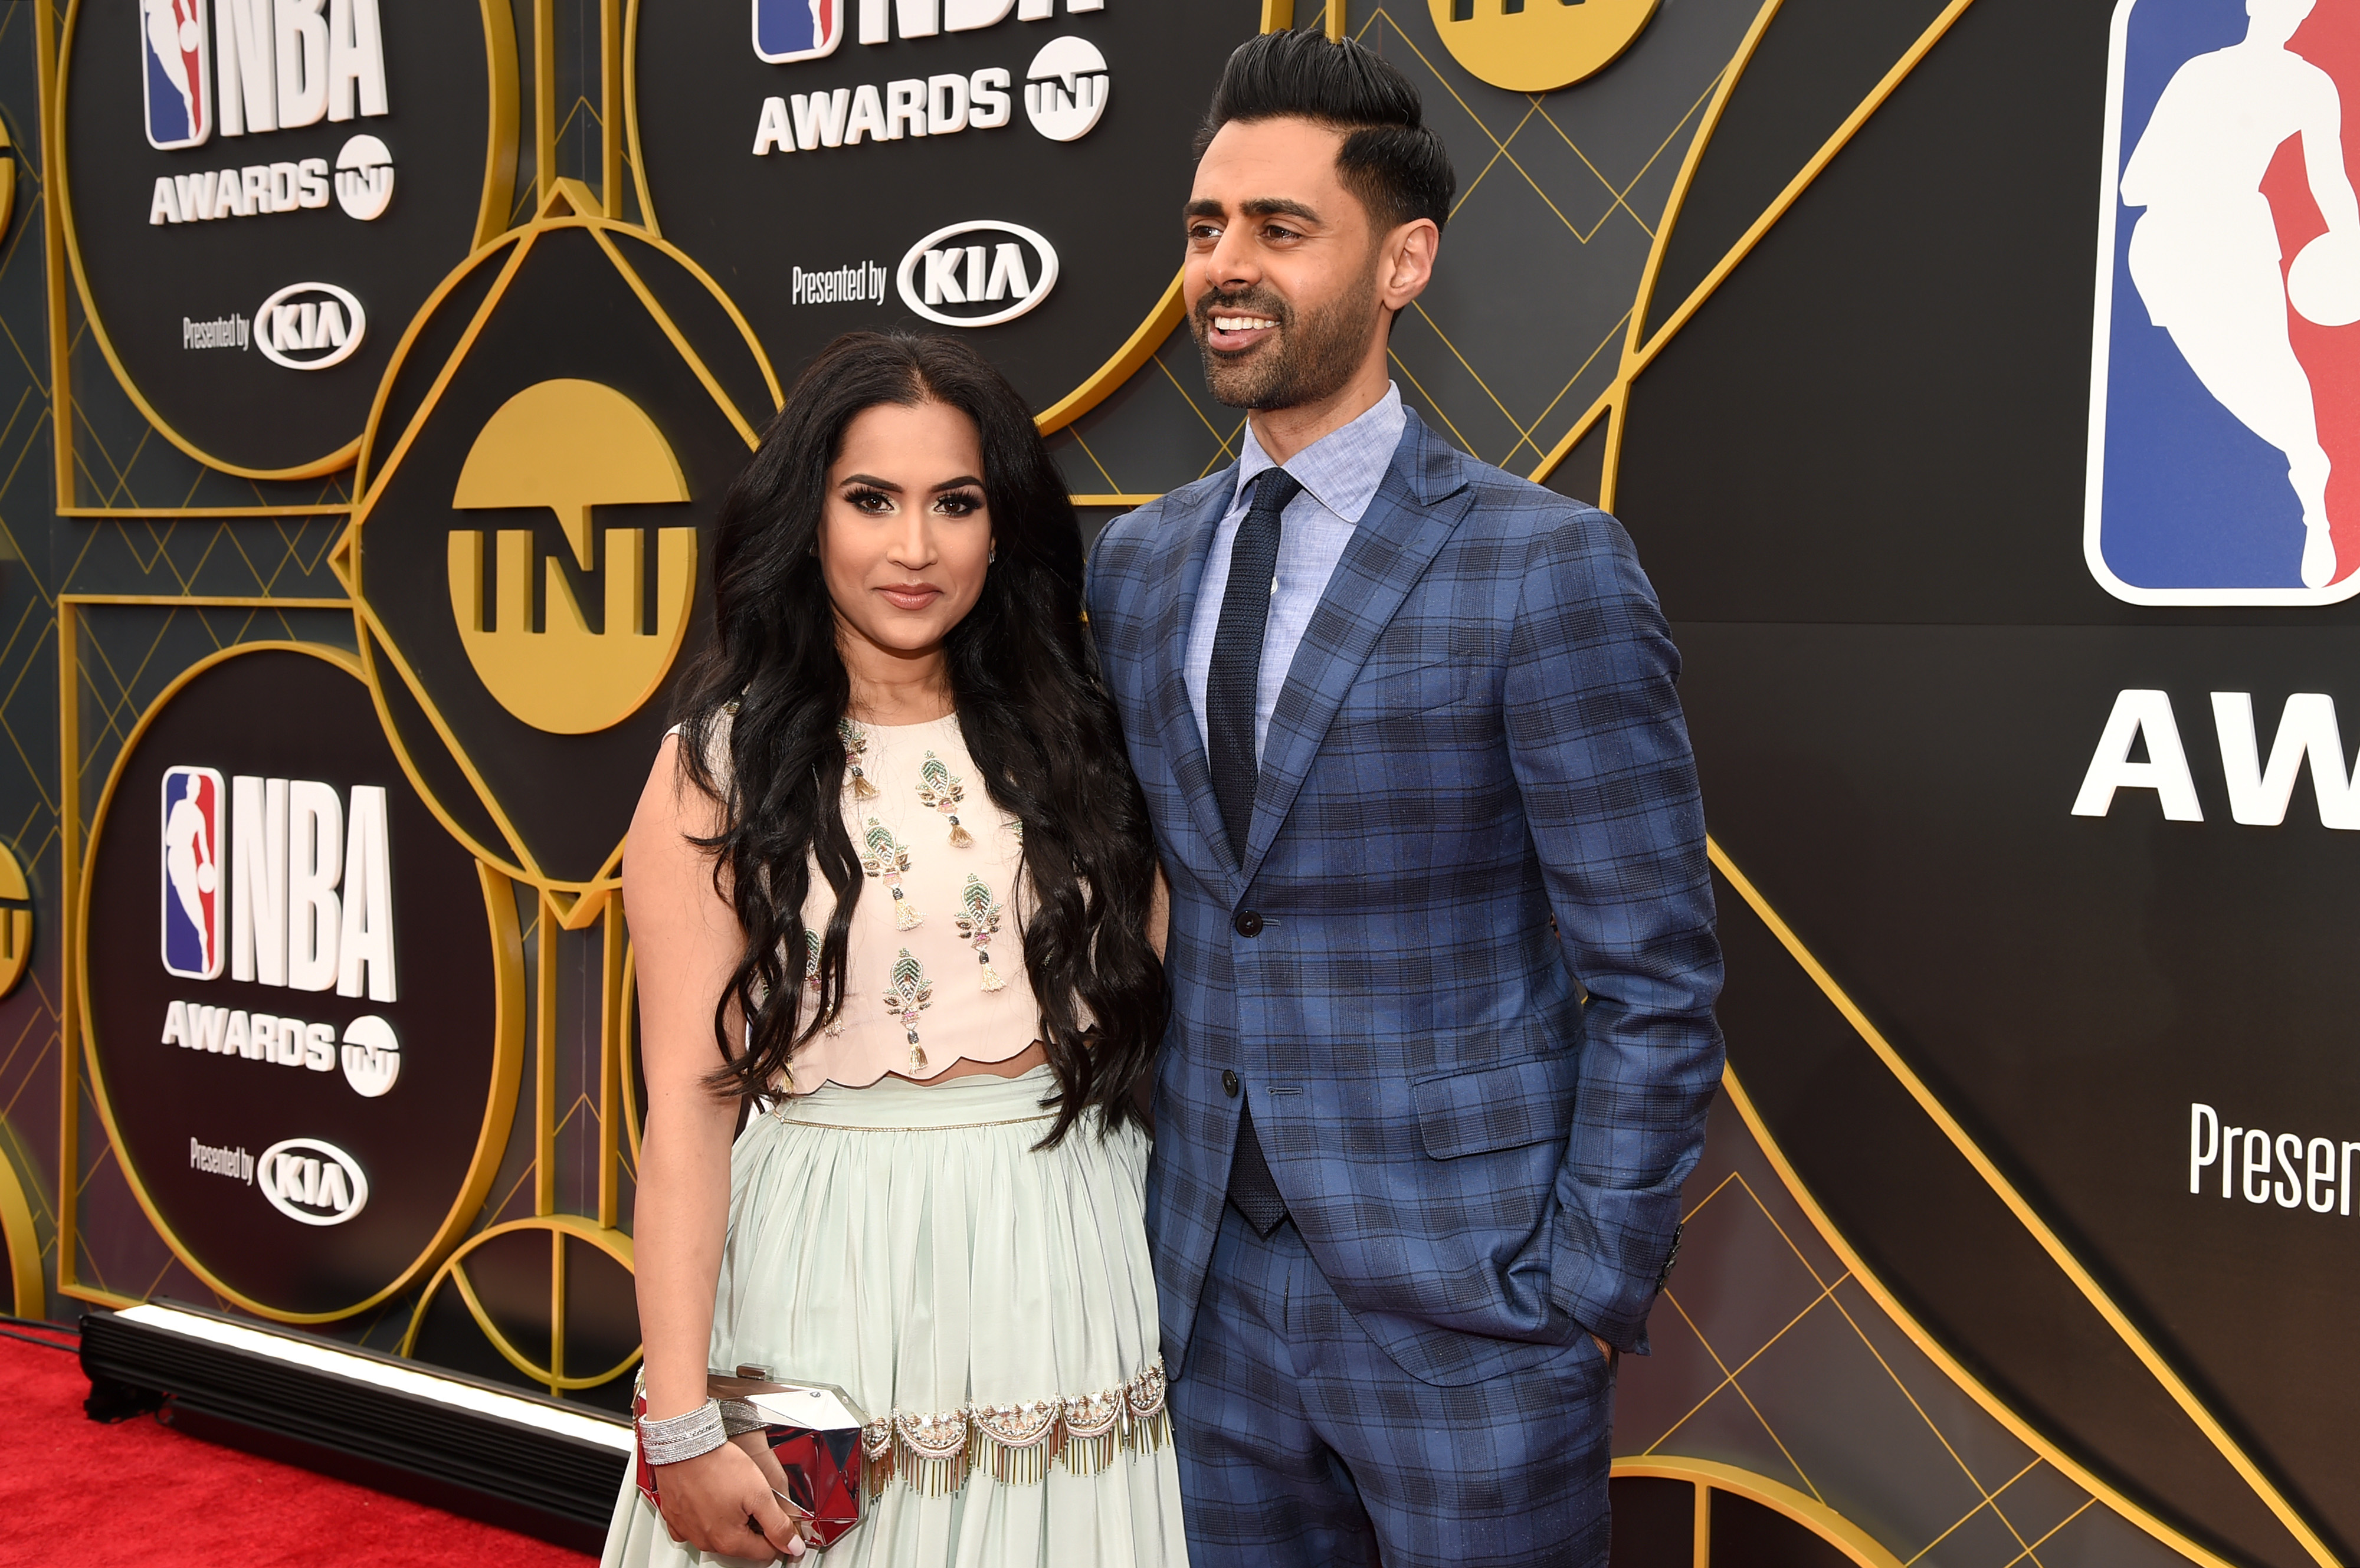 Beena Patel and Hasan Minhaj are pictured at the 2019 NBA Awards presented by Kia on TNT at Barker Hangar on June 24, 2019, in Santa Monica, California | Source: Getty images